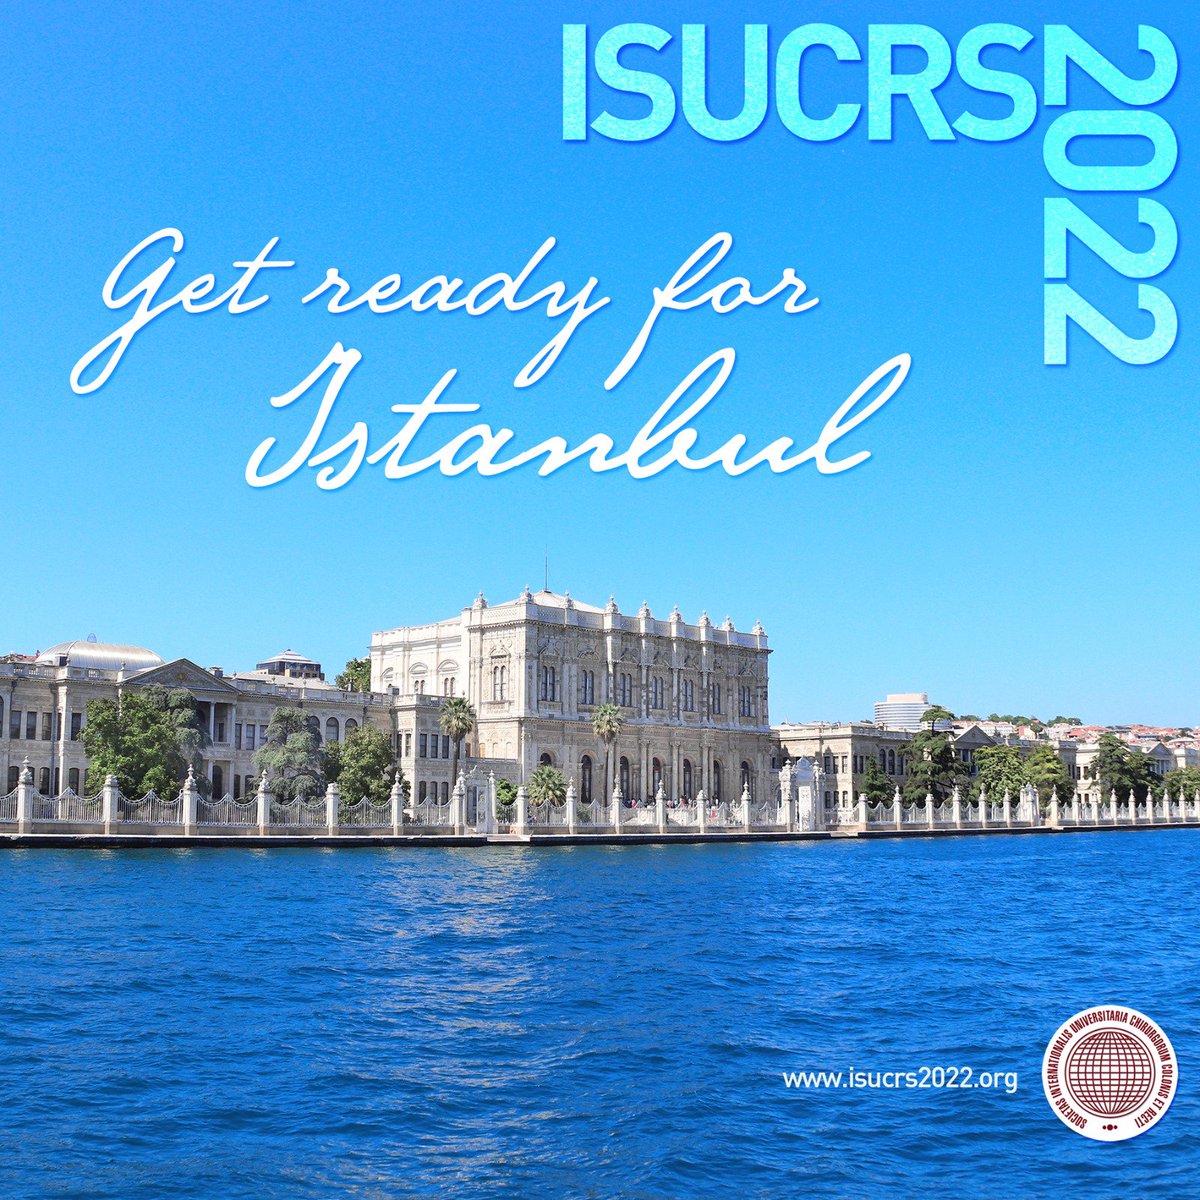 Looking forward to meeting you soon! 📍İstanbul, Turkey 🗓 27-29 October 2022 🌐 isucrs2022.org #isucrs #isucrs2022 #isucrsistanbul